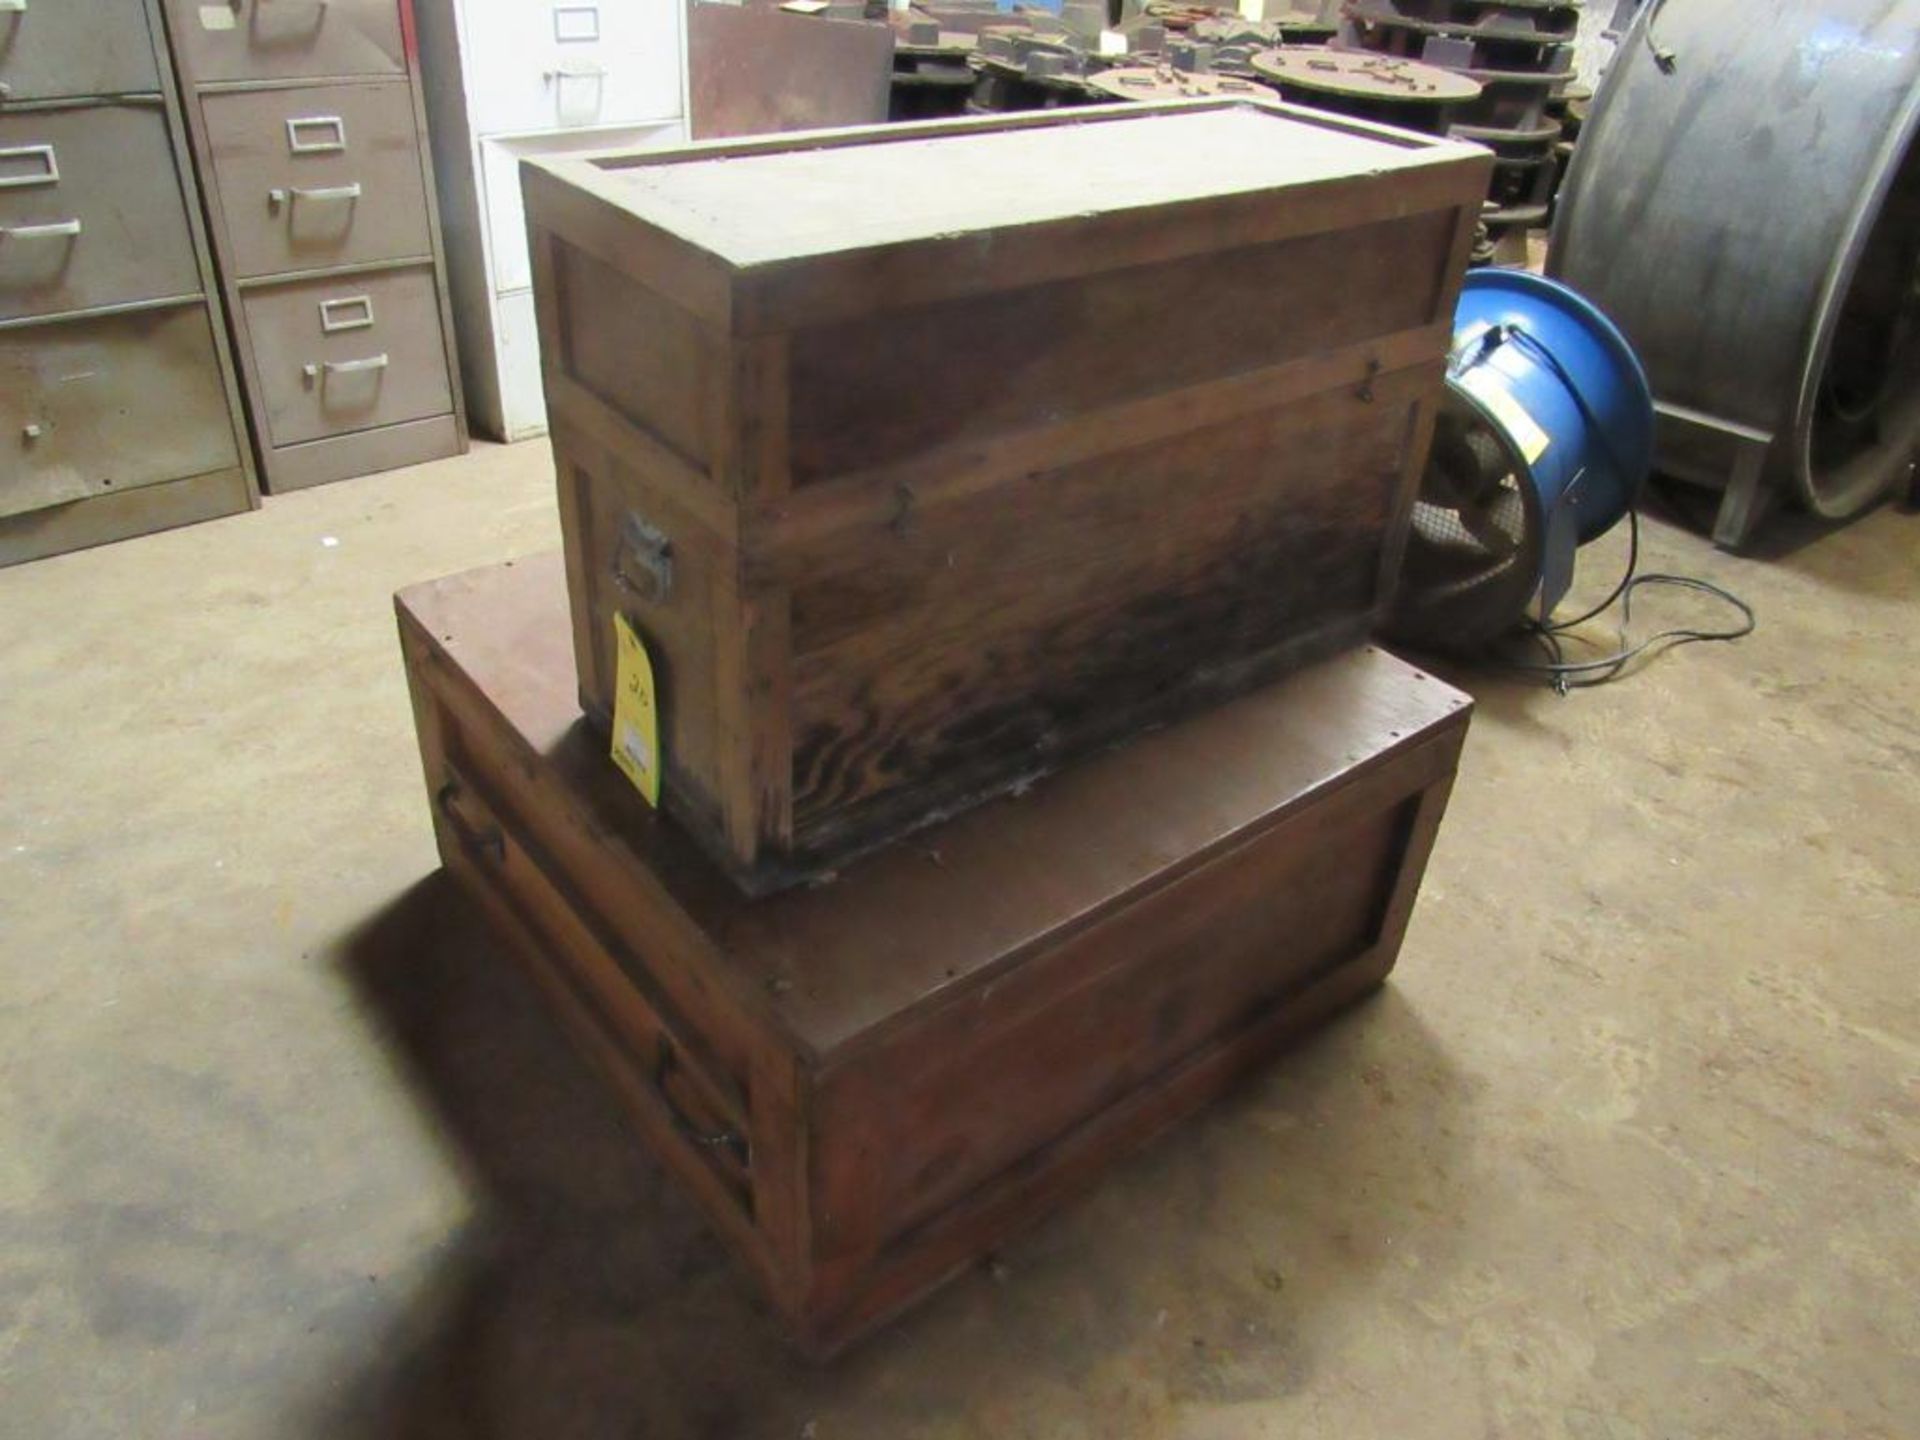 Lot of 2 Wooden Chests, No Contents: (1) 32" x 32" x 15" H, (1) 31" x 12.5" x 20" H - Image 2 of 4